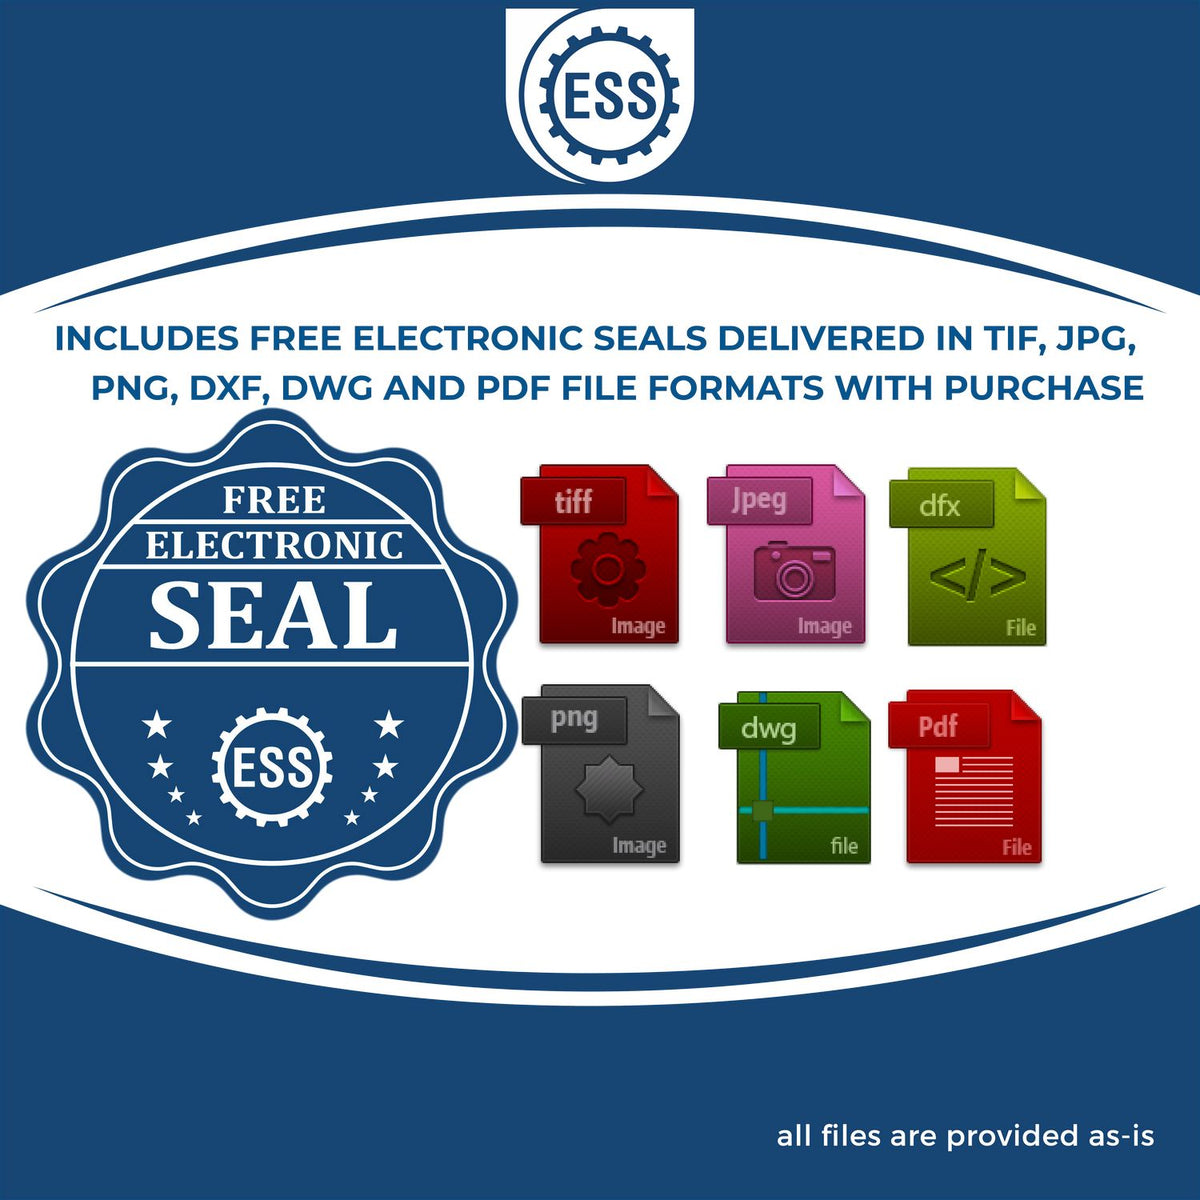 An infographic for the free electronic seal for the Slim Pre-Inked Connecticut Professional Geologist Seal Stamp illustrating the different file type icons such as DXF, DWG, TIF, JPG and PNG.